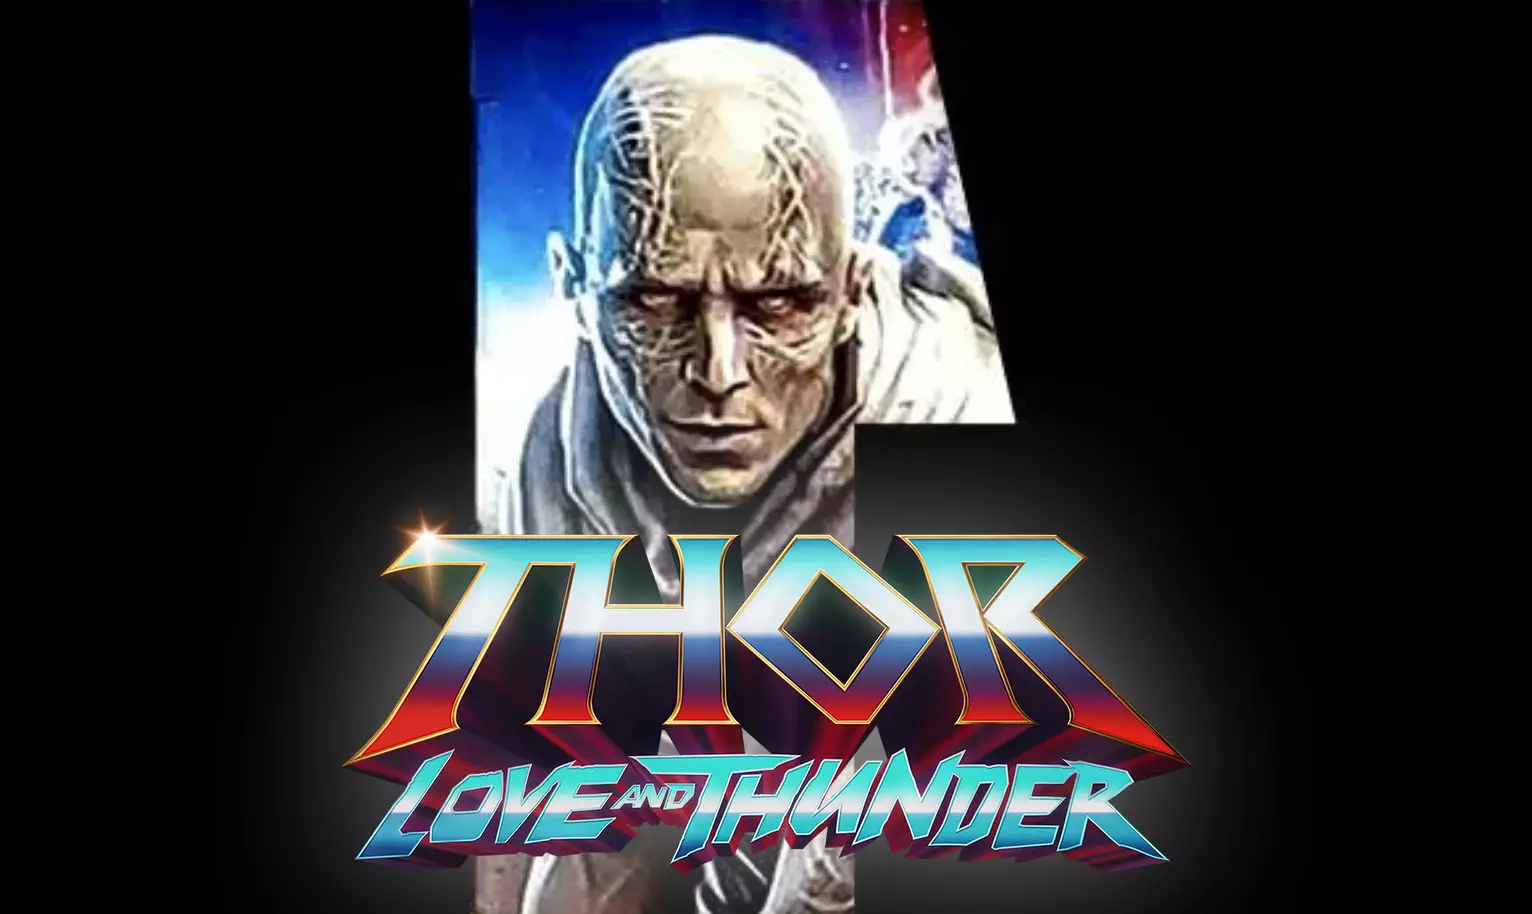 Rotten Tomatoes - The 'Thor: Love and Thunder' press tour